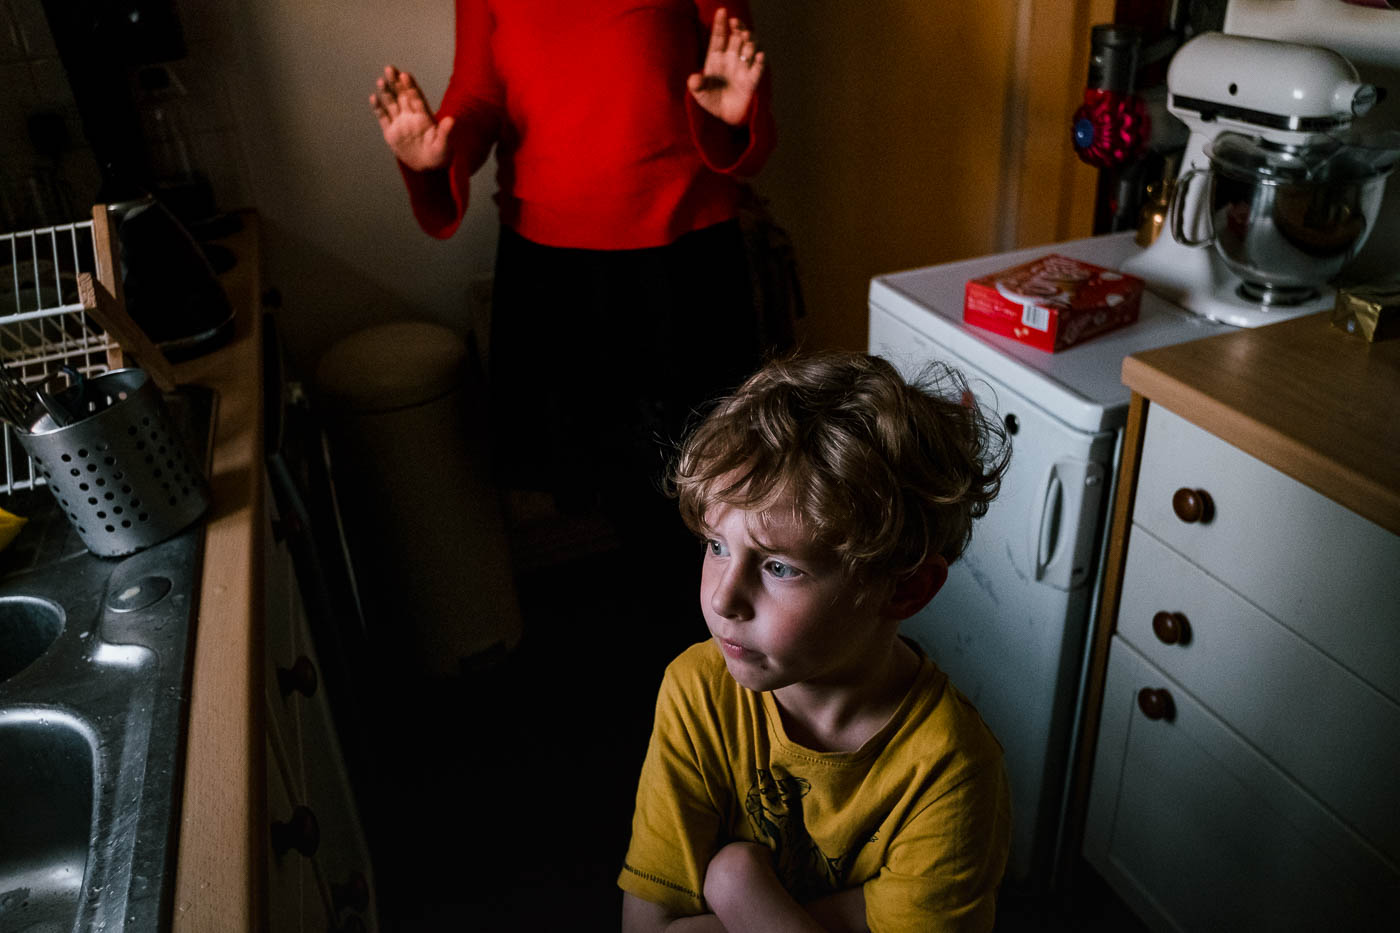 Boy crossing arms in kitchen with mother behind